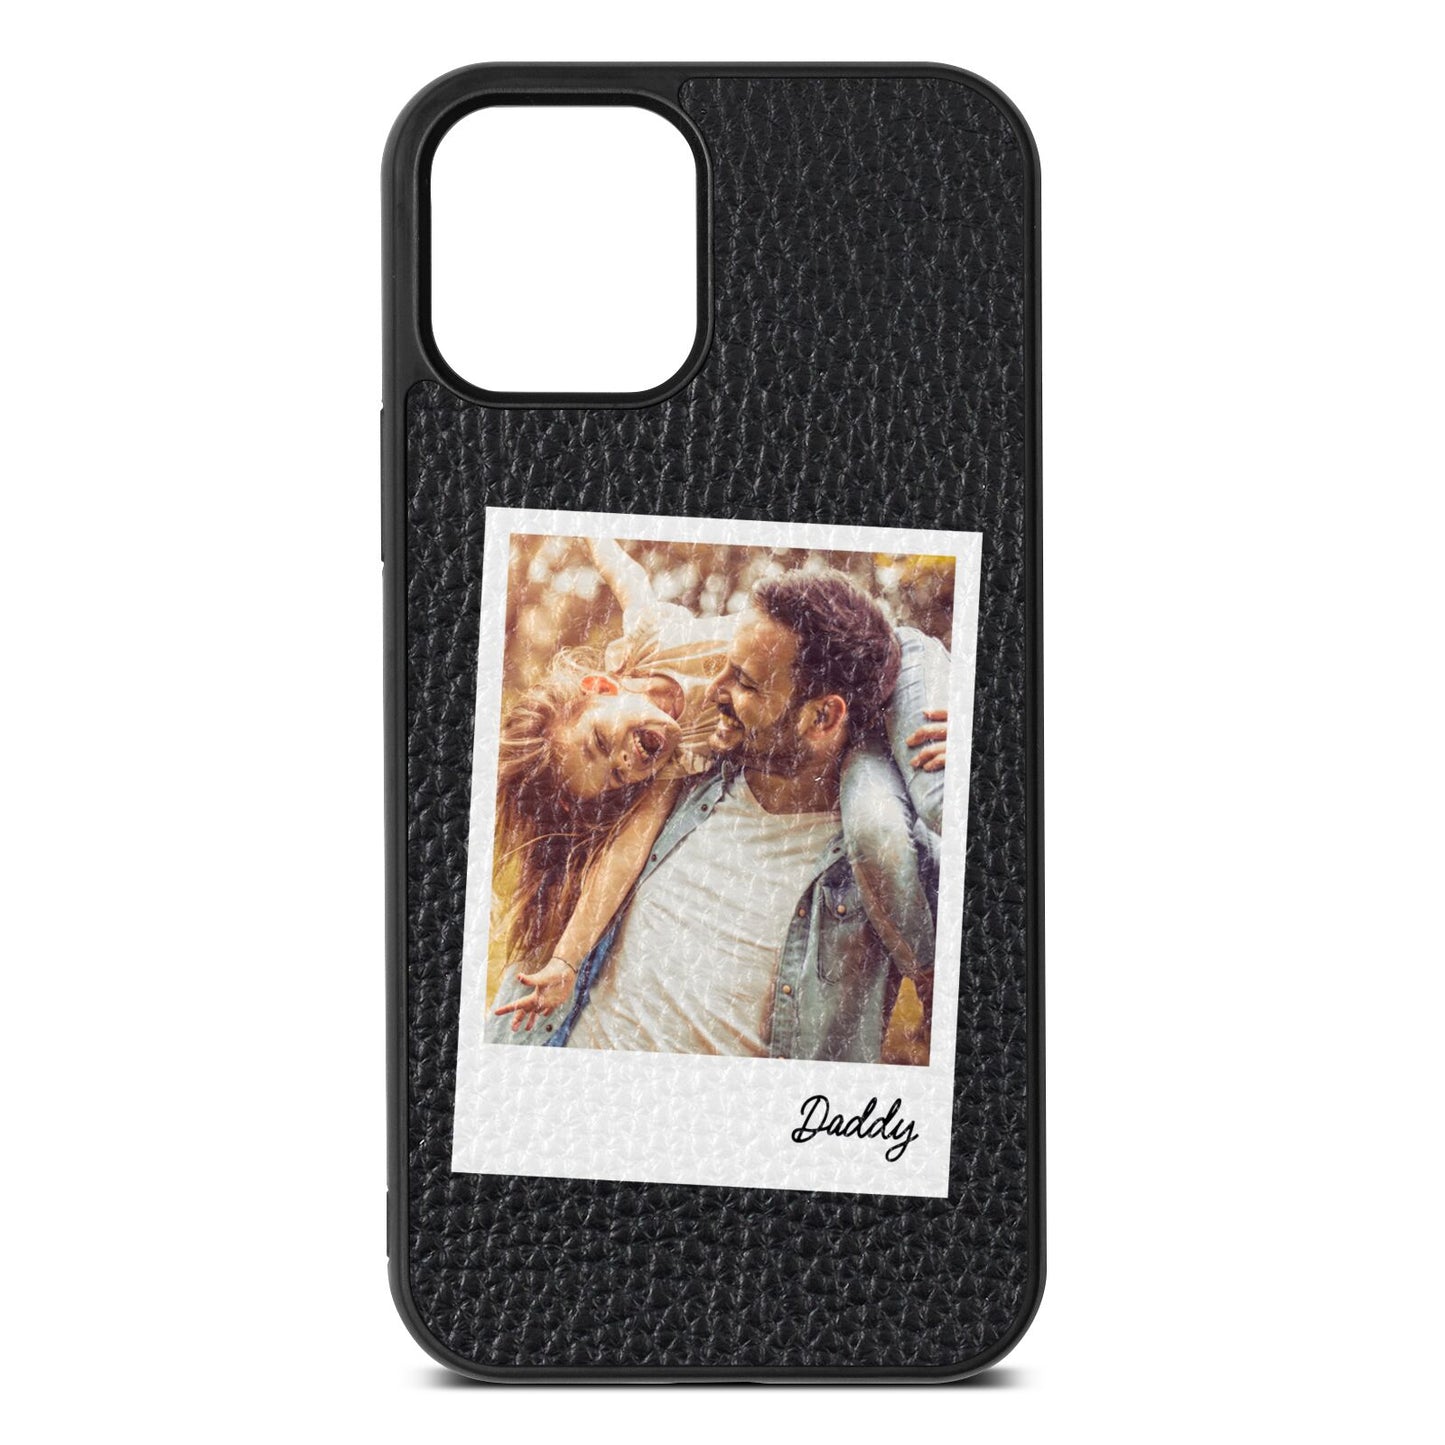 Fathers Day Photo Black Pebble Leather iPhone 12 Case